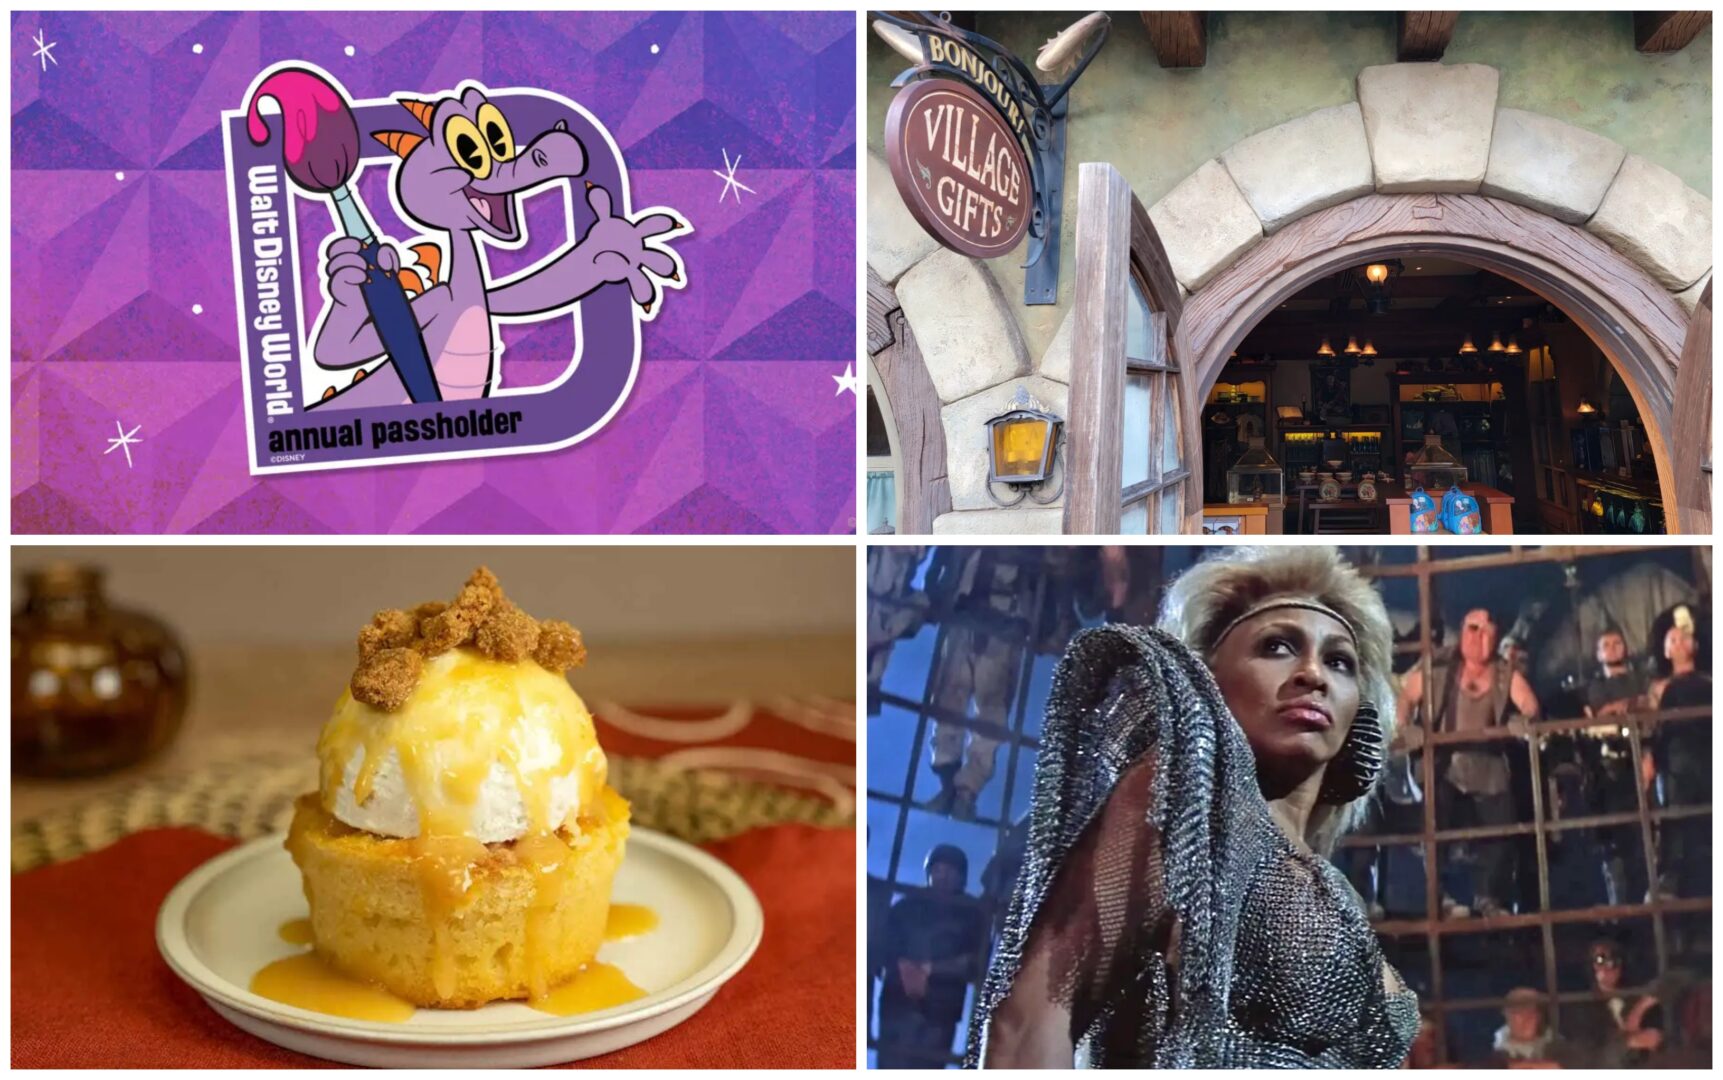 Disney News Highlights: “Queen of Rock” Tina Turner Passes Away, Figment Annual Passholder Coming to Epcot, New Summer Eats and Sips at Walt Disney World